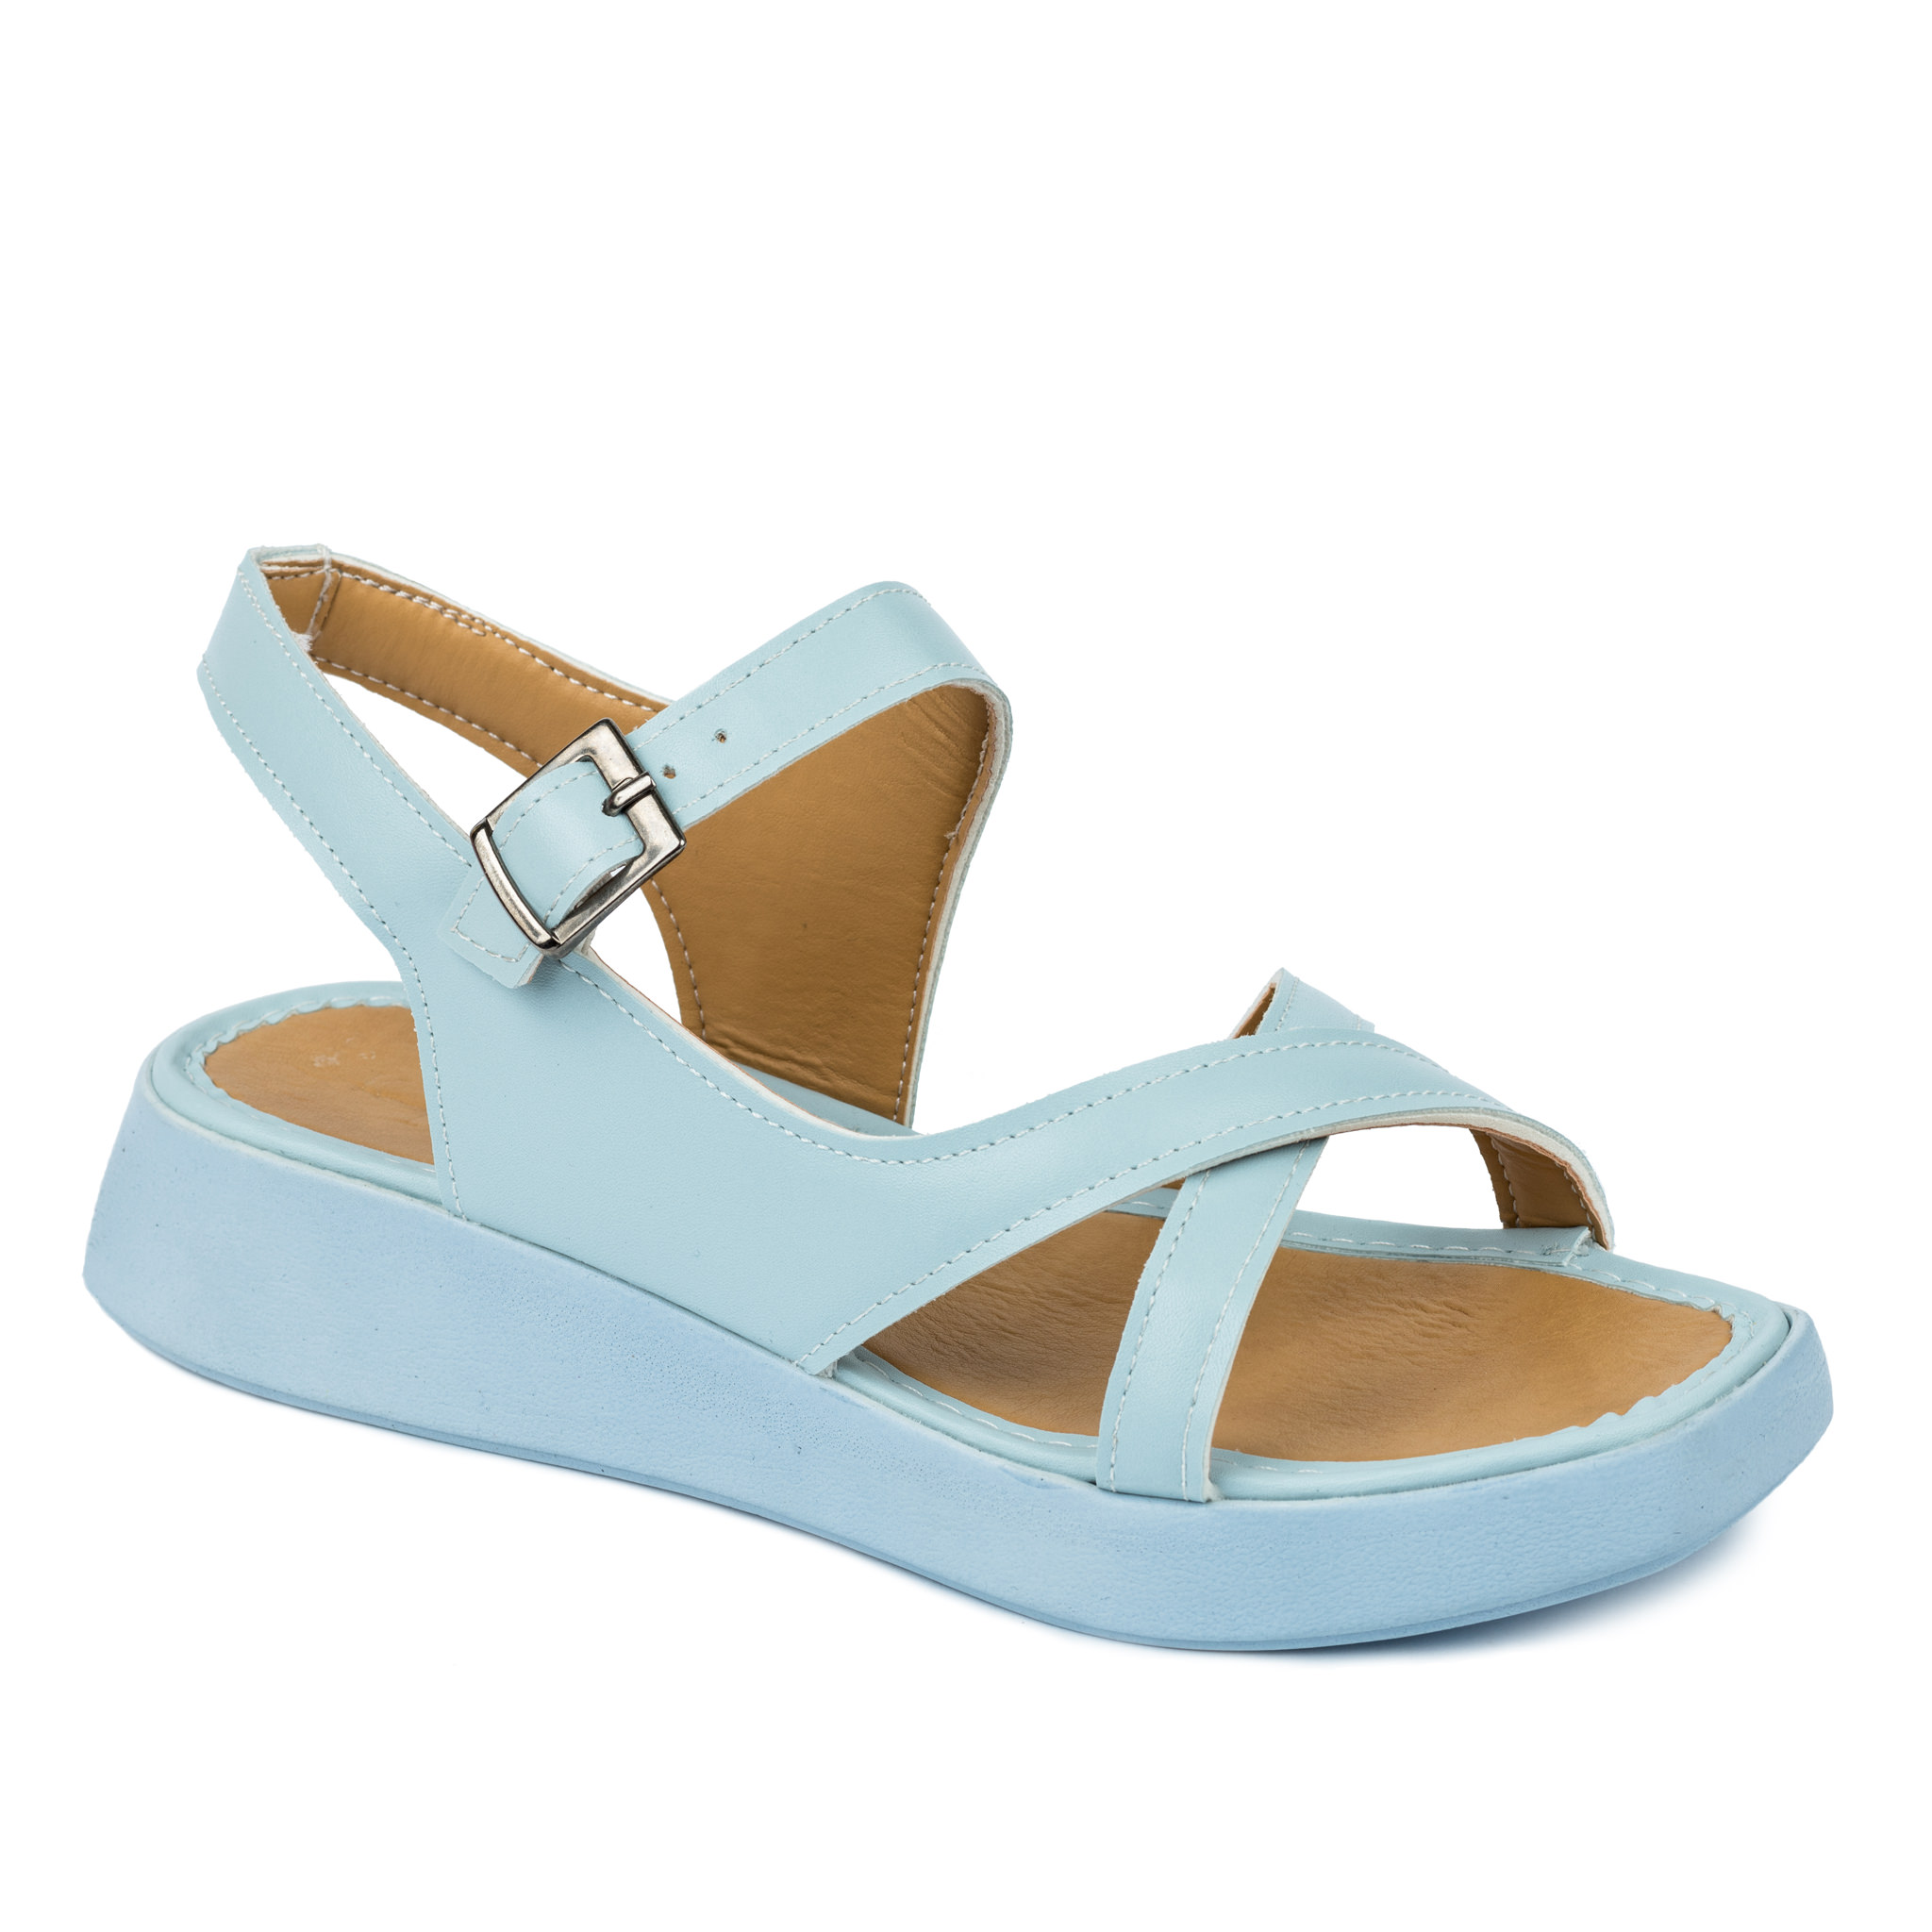 CROSS STRAP SANDALS WITH BELTS - BLUE